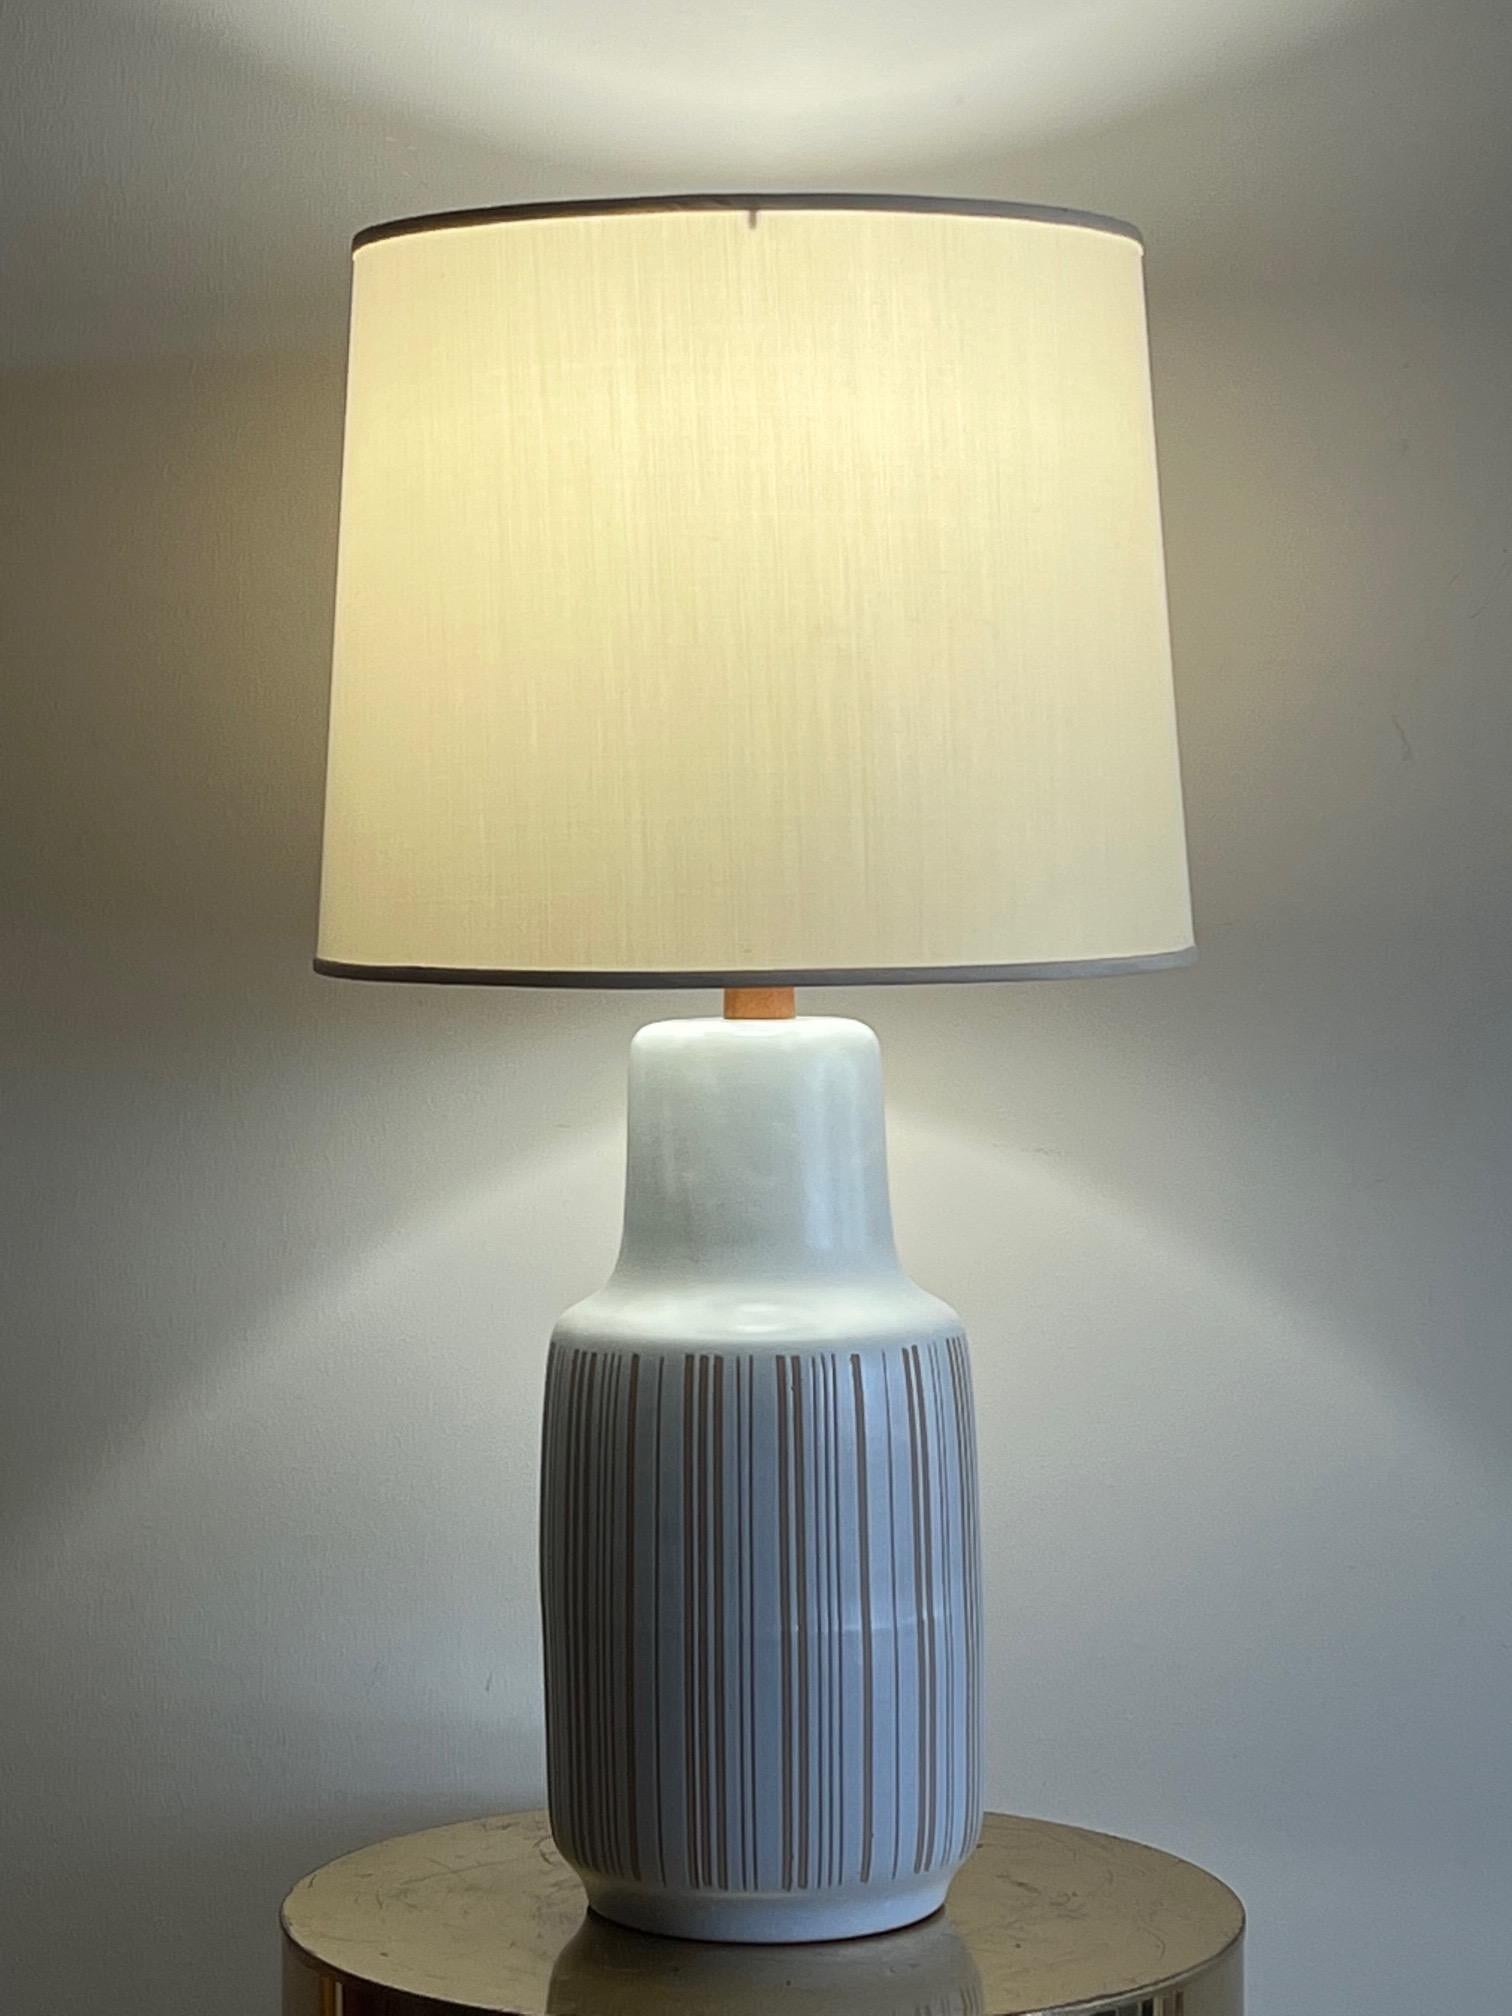 Mid-Century Modern Martz Lamp with Vertical Decoration, ca' 1960's For Sale